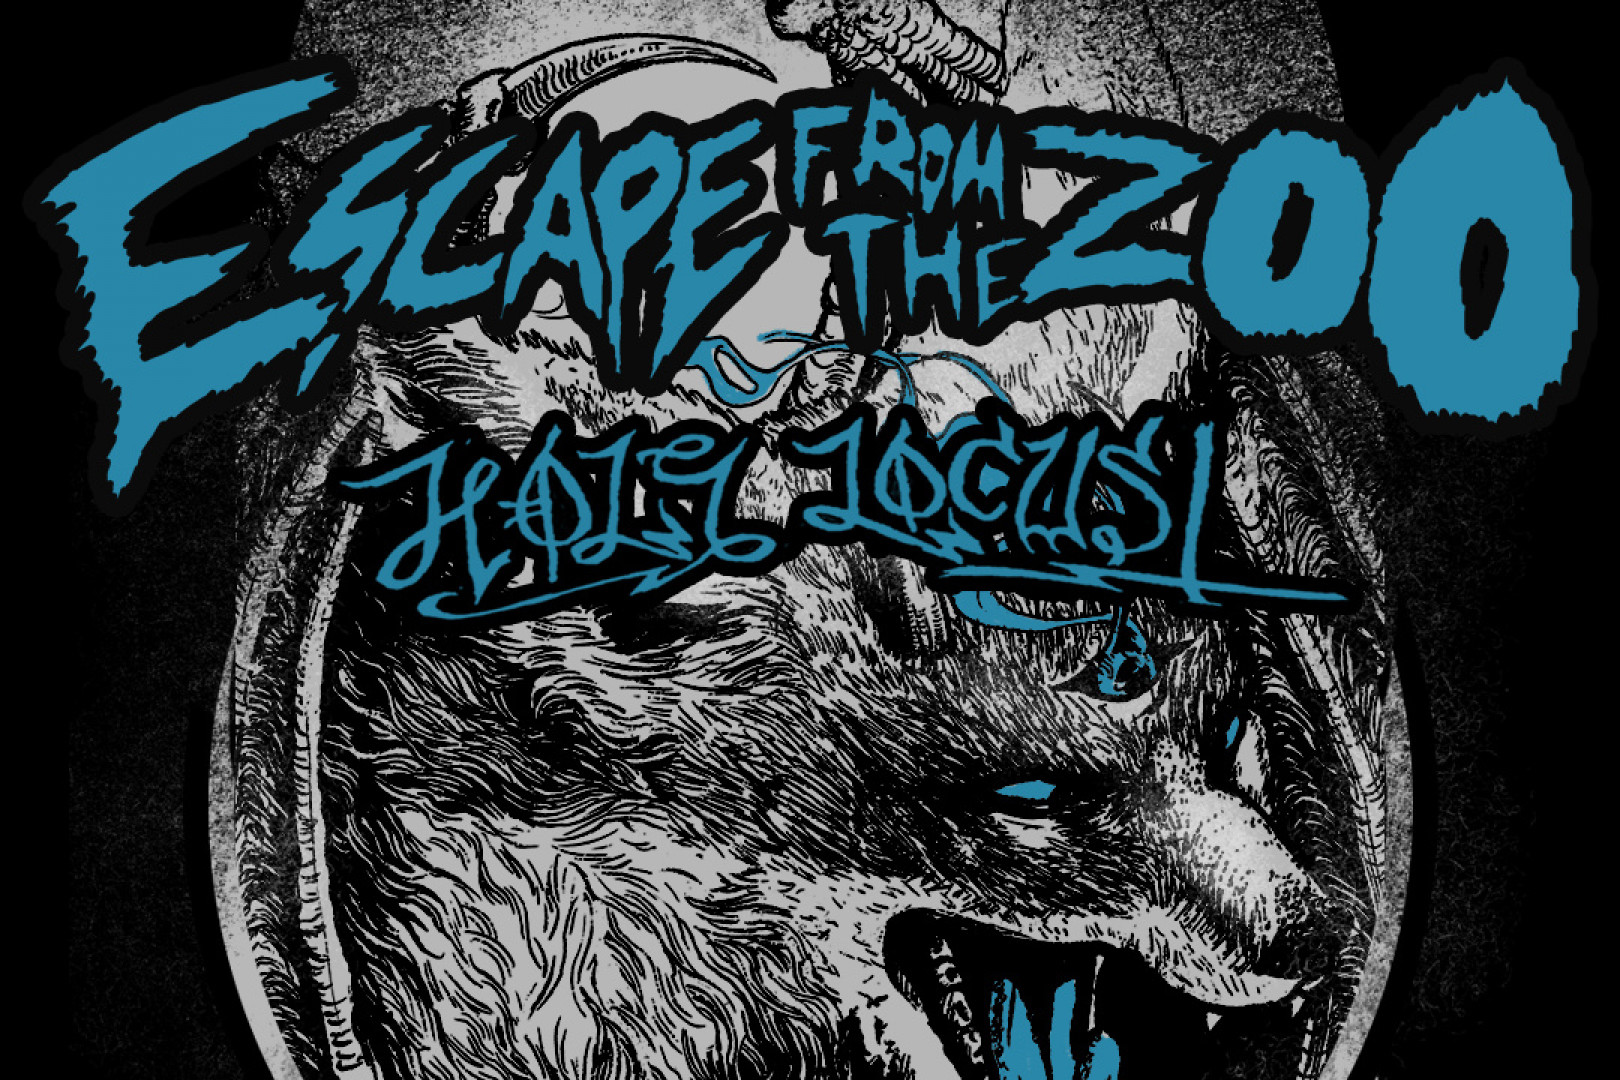 Escape From The Zoo announce US tour dates